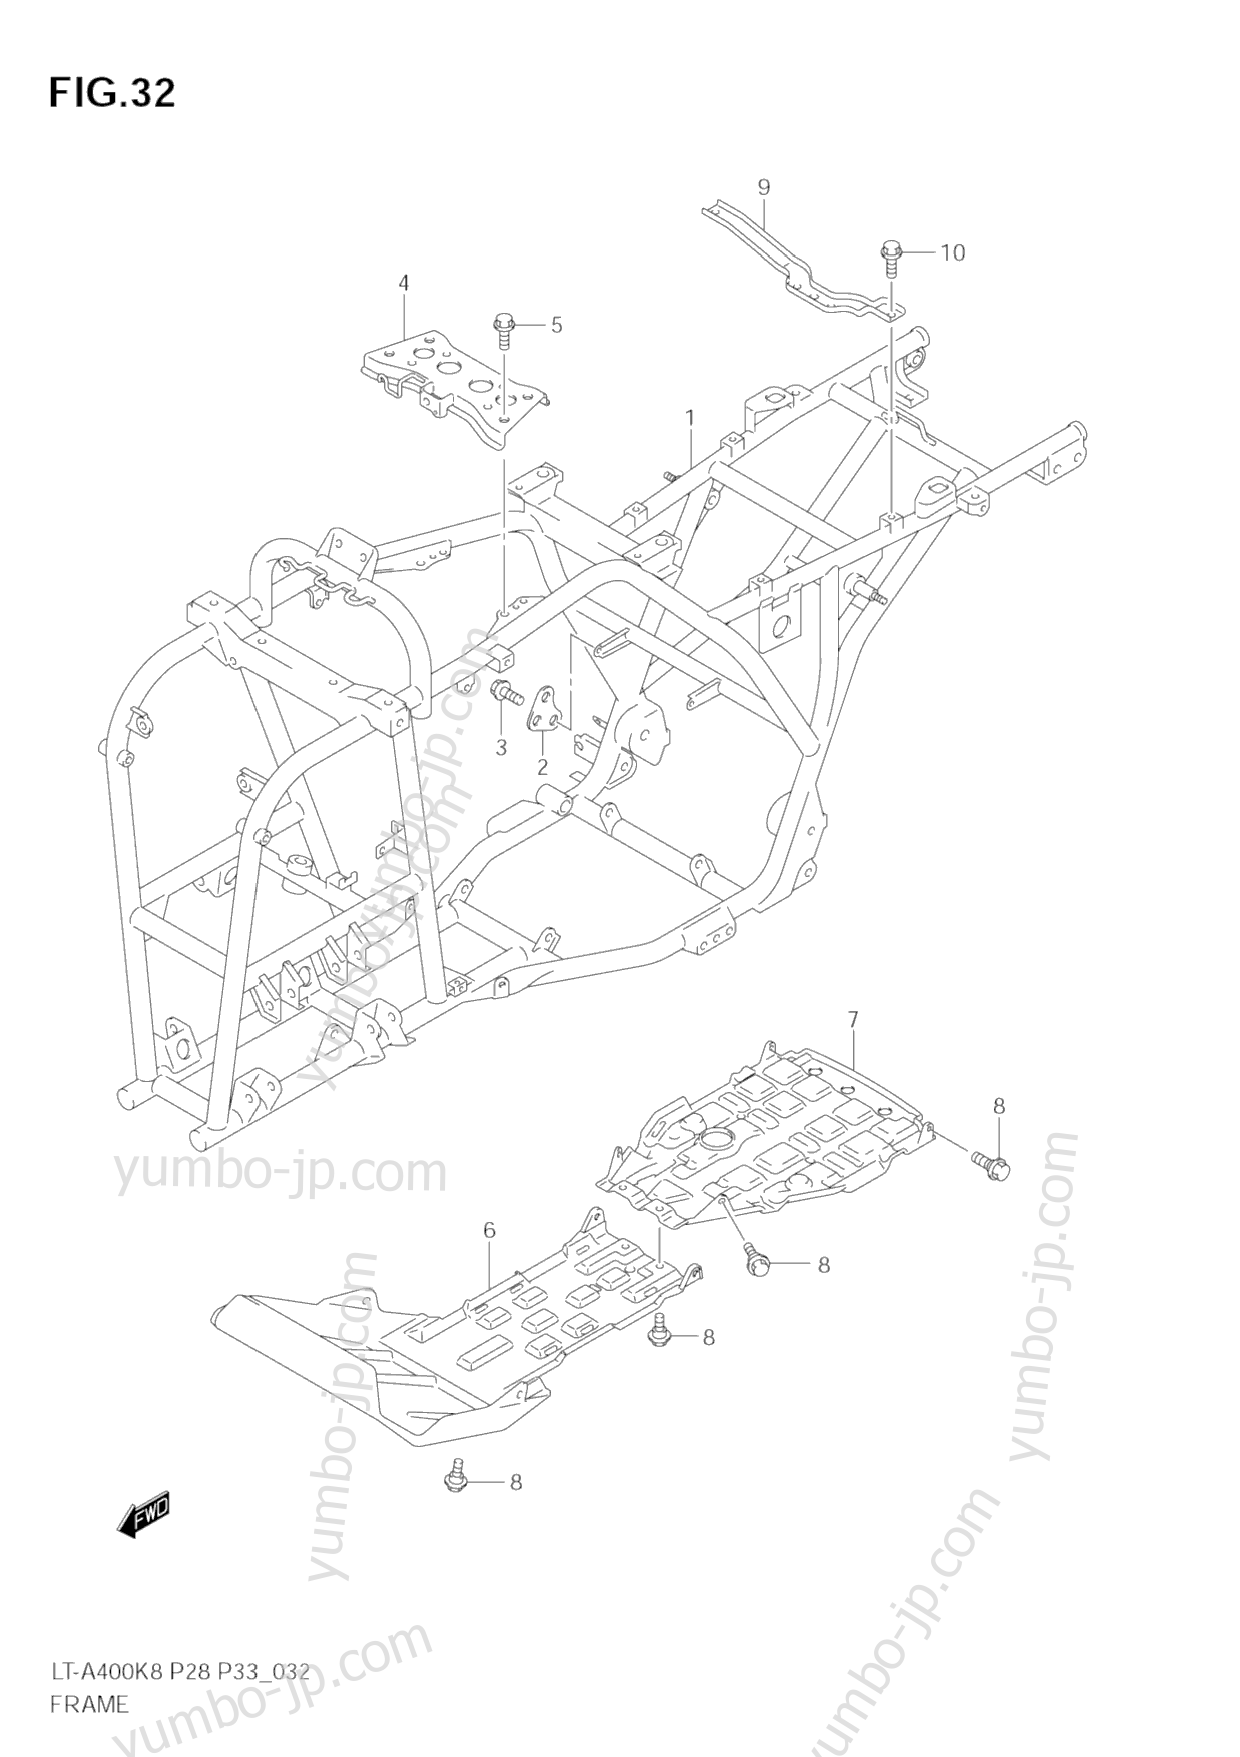 FRAME for ATVs SUZUKI KingQuad (LT-A400) 2009 year